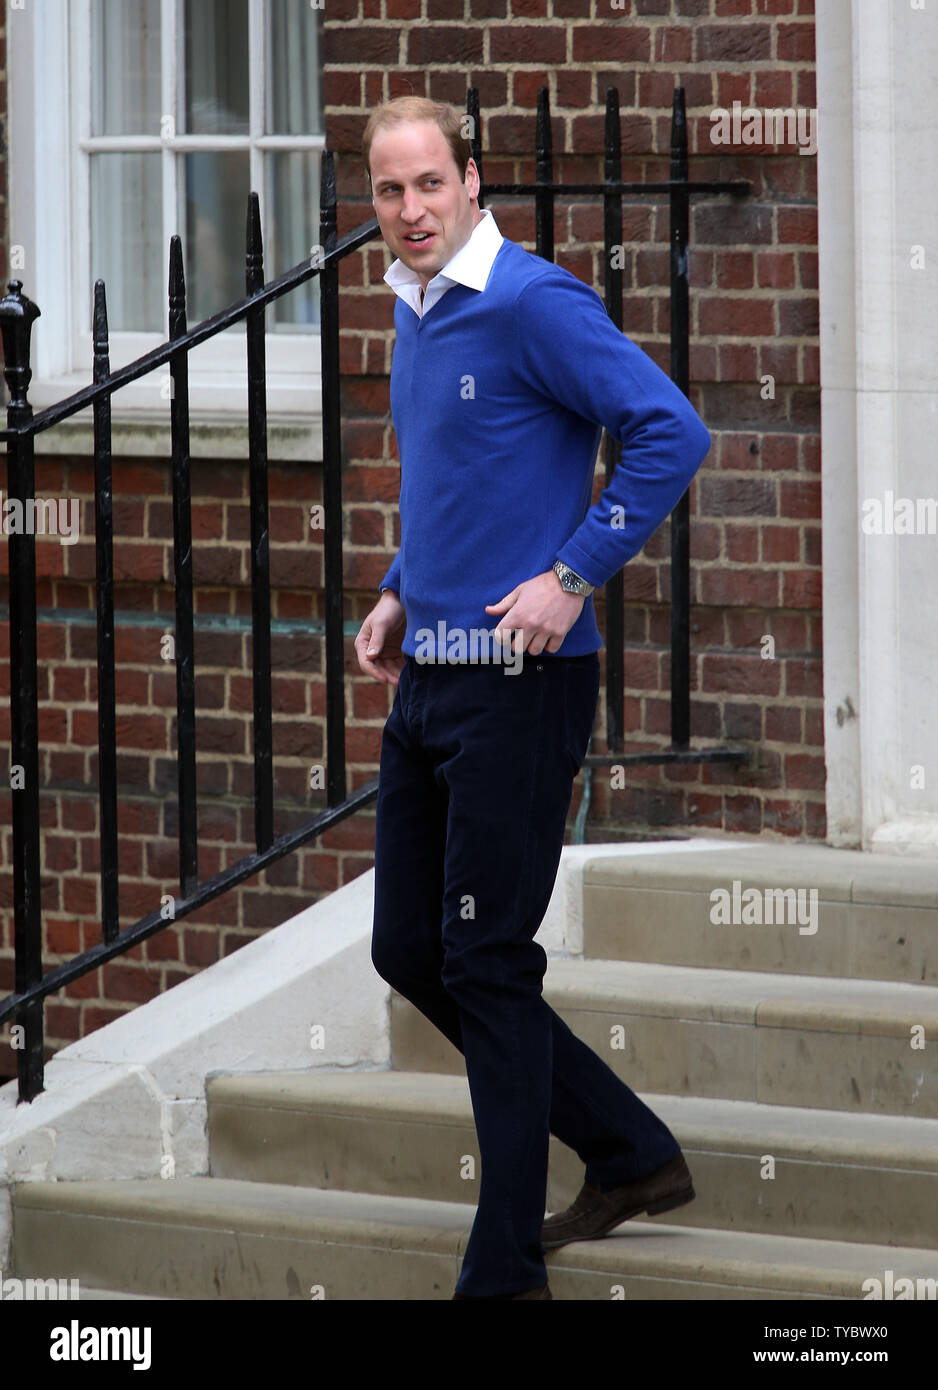 His Royal Highness Prince William leaves the Lindo Wing St Mary's Hospital, London on May 02, 2015. The Duchess of Cornwall gave birth to a girl weighing eight ponds three ounces.  Photo by Hugo Philpott/UPI. Stock Photo